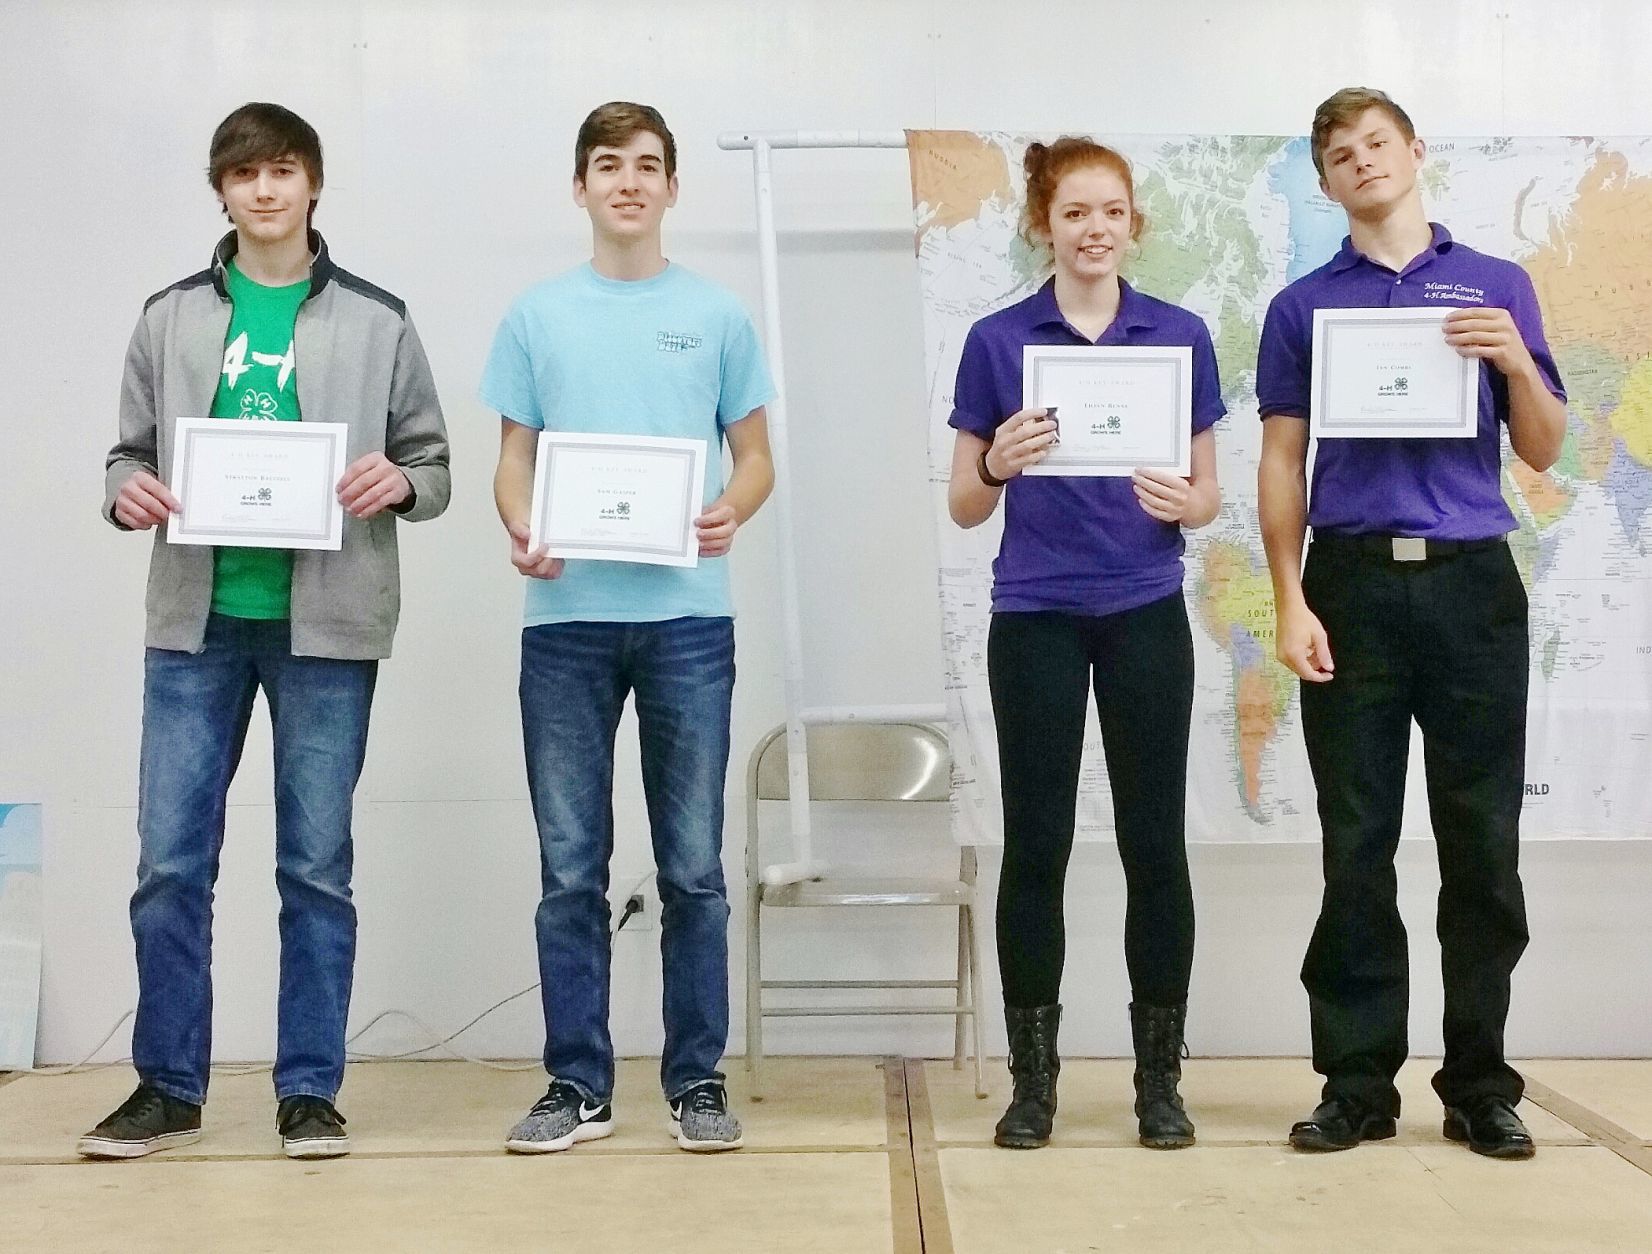 Youths earn awards during 4-H Achievement Celebration Education republic-online pic image